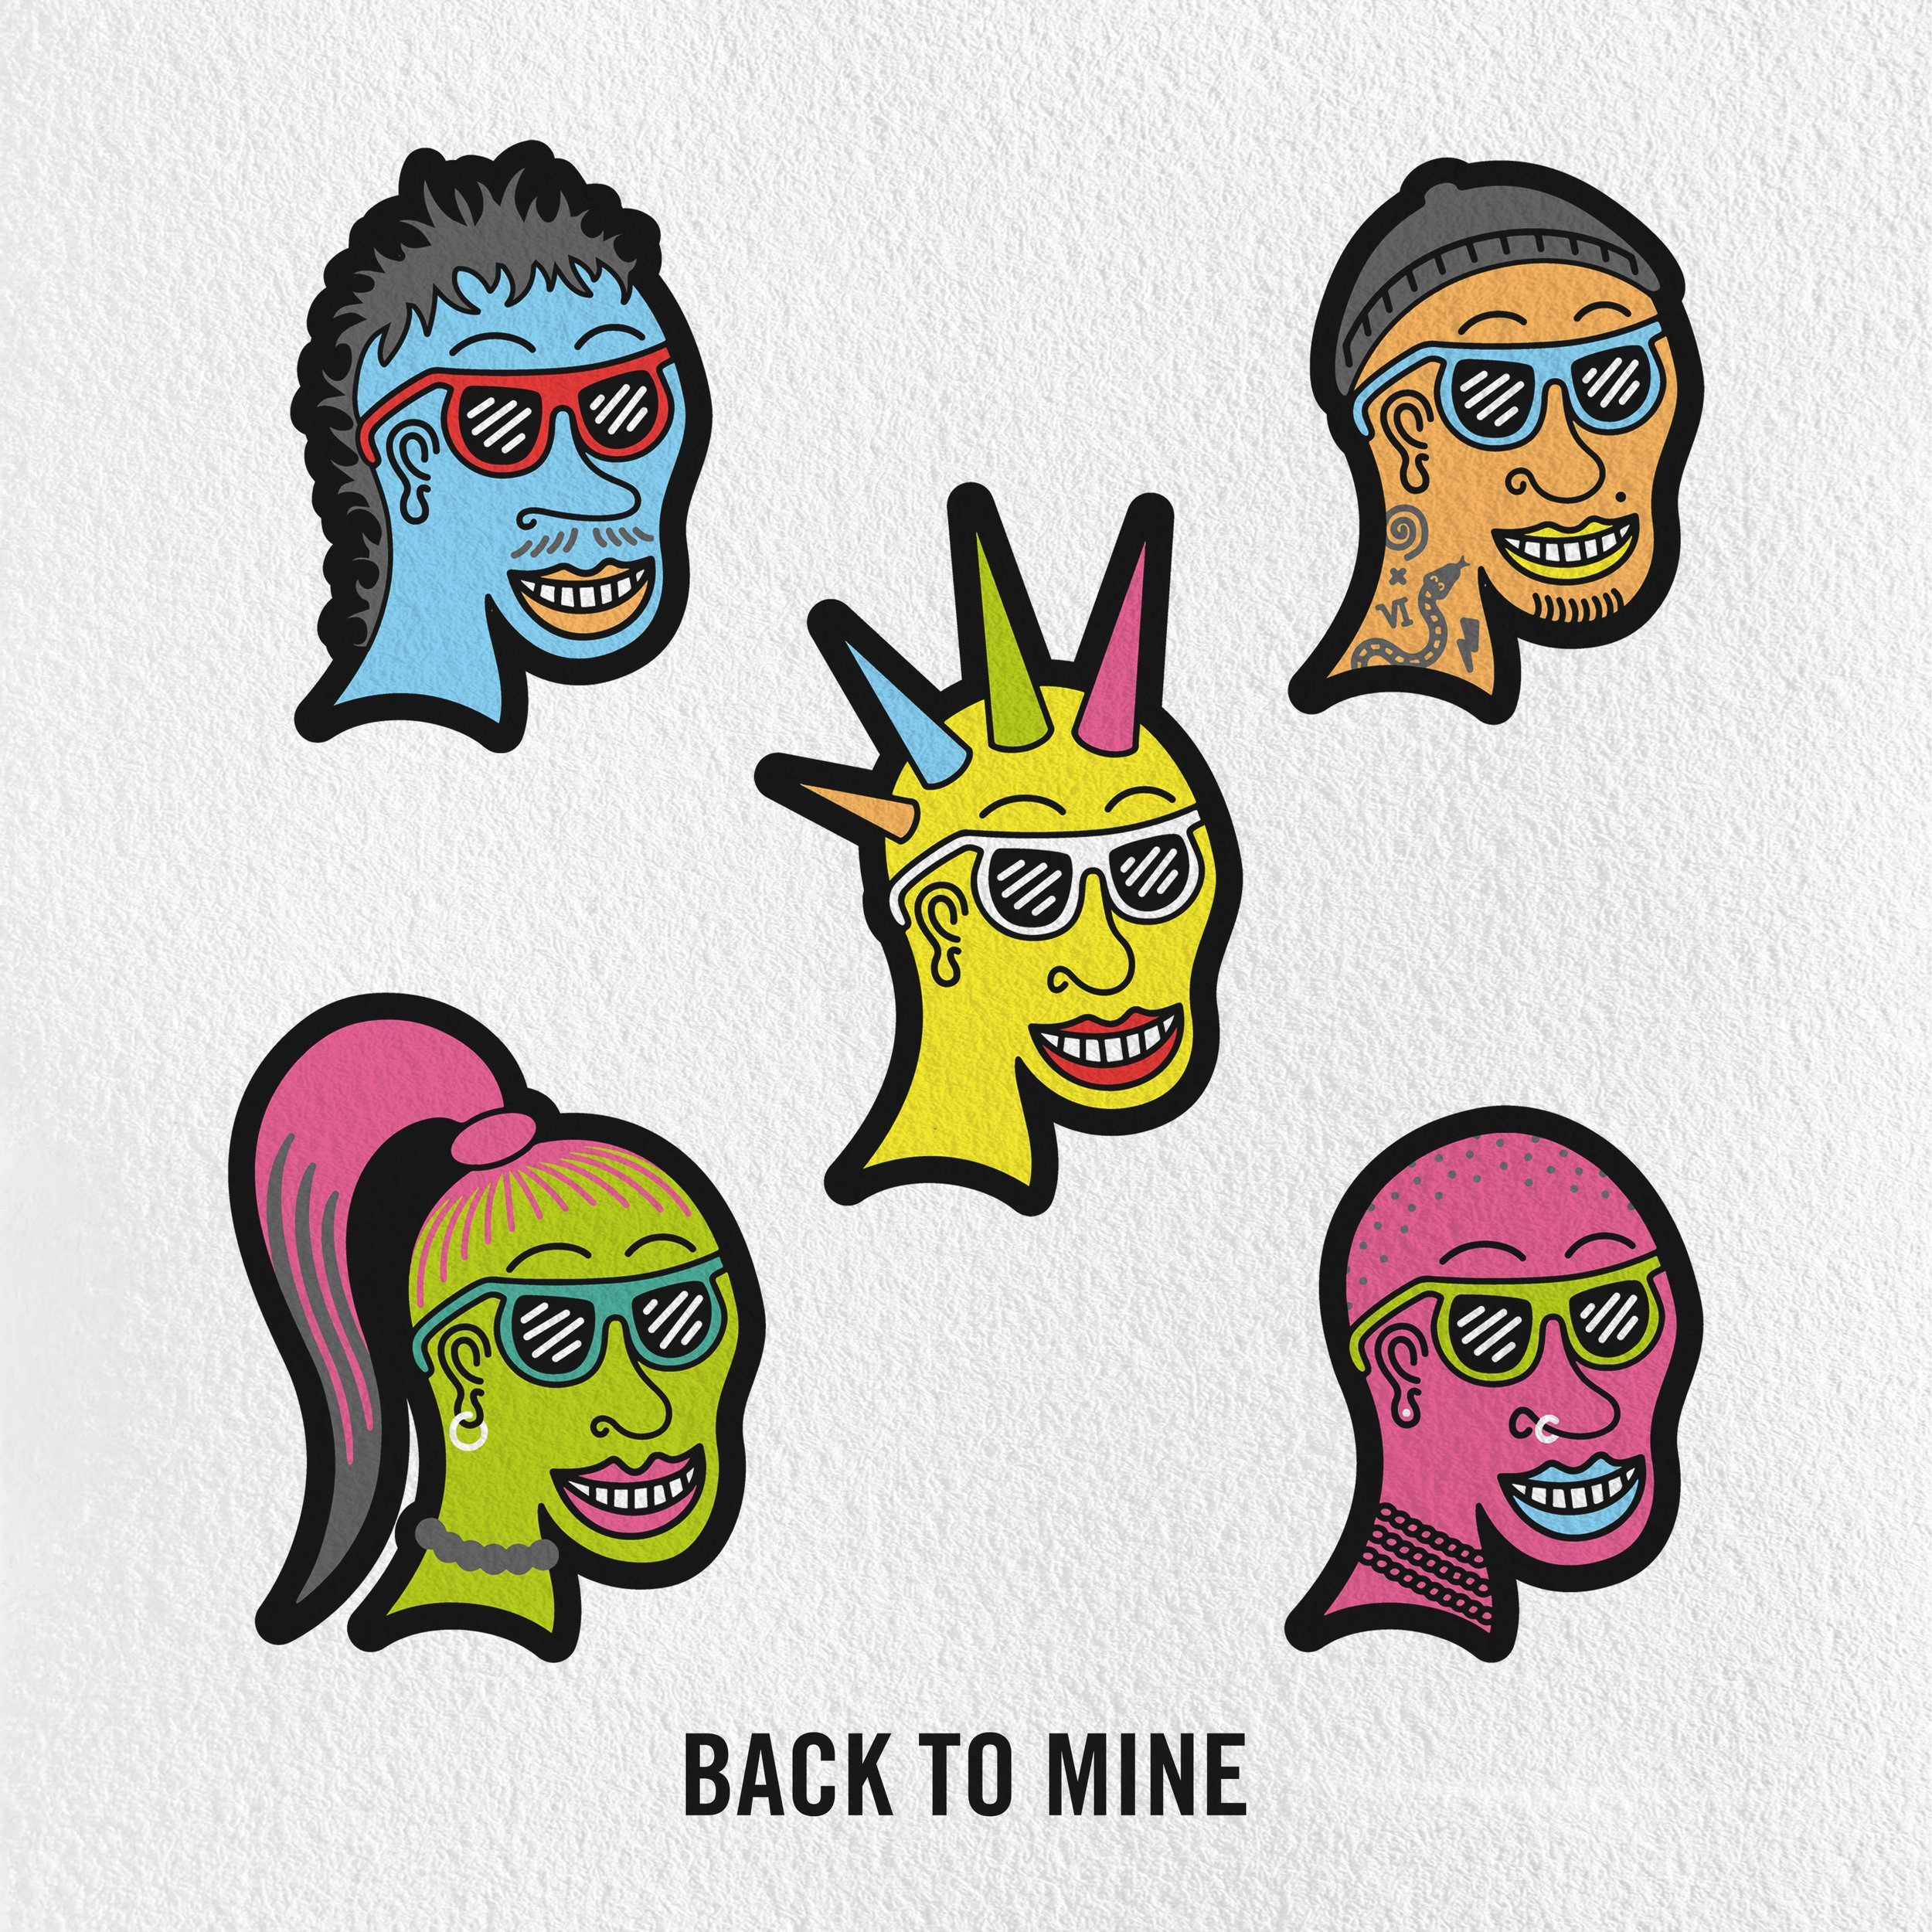  2022 |  ‘Back To Mine’ Character Mascots,  Illustration 